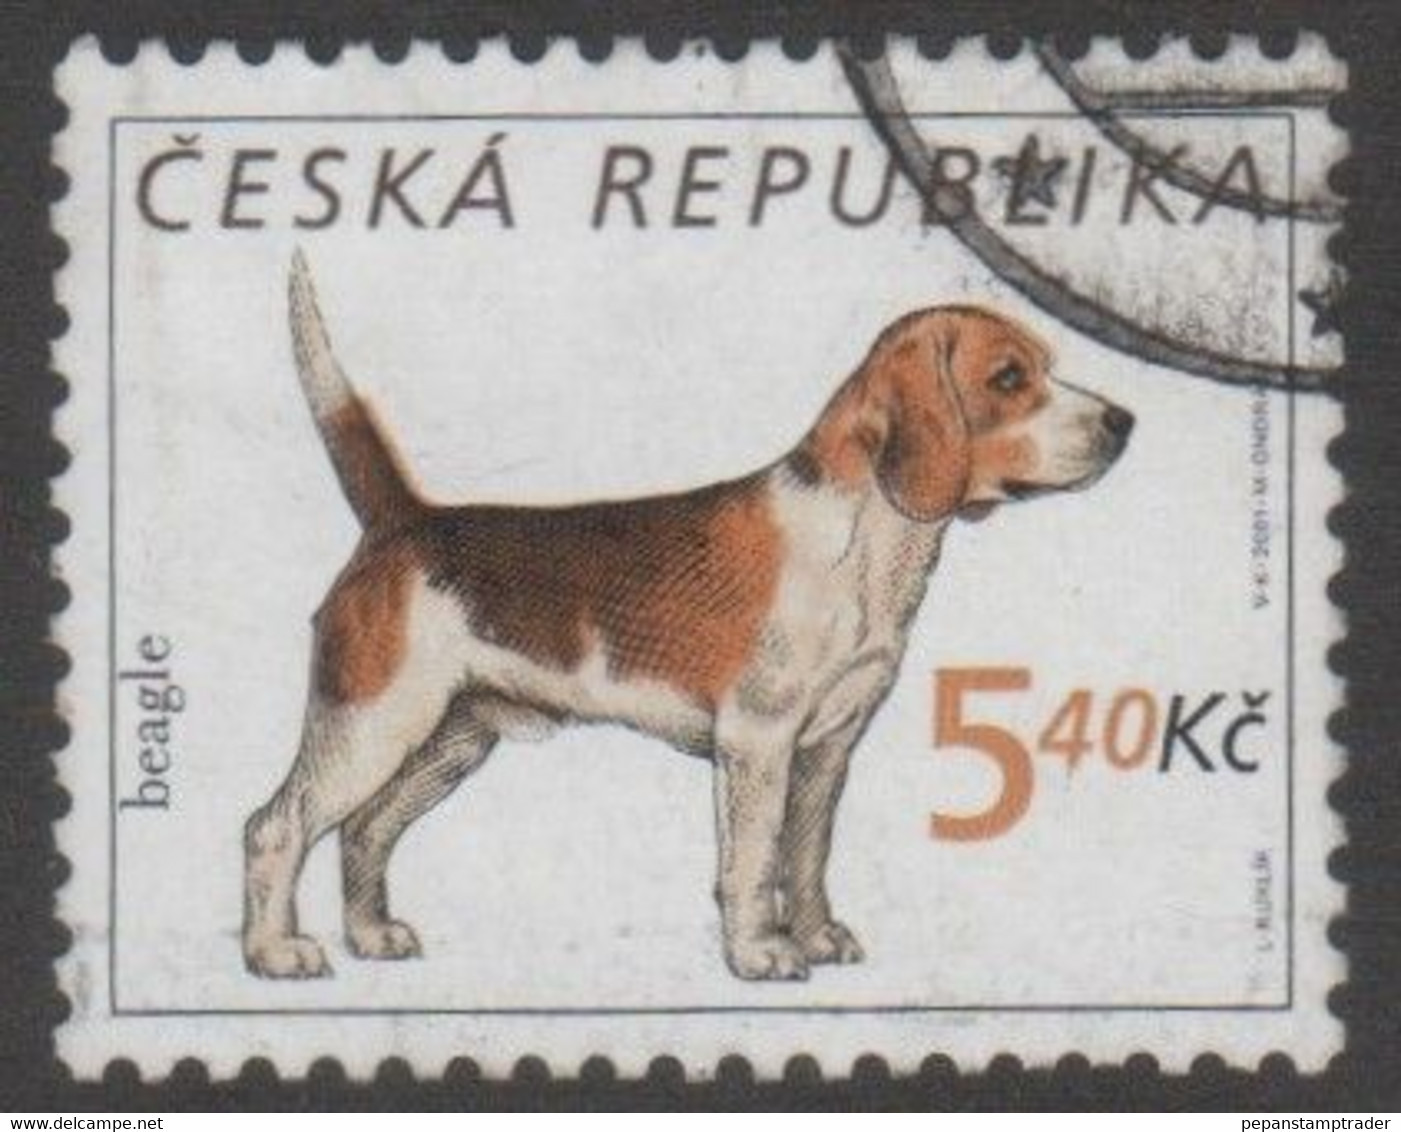 Czech Republic - #3150-b - Used - Used Stamps